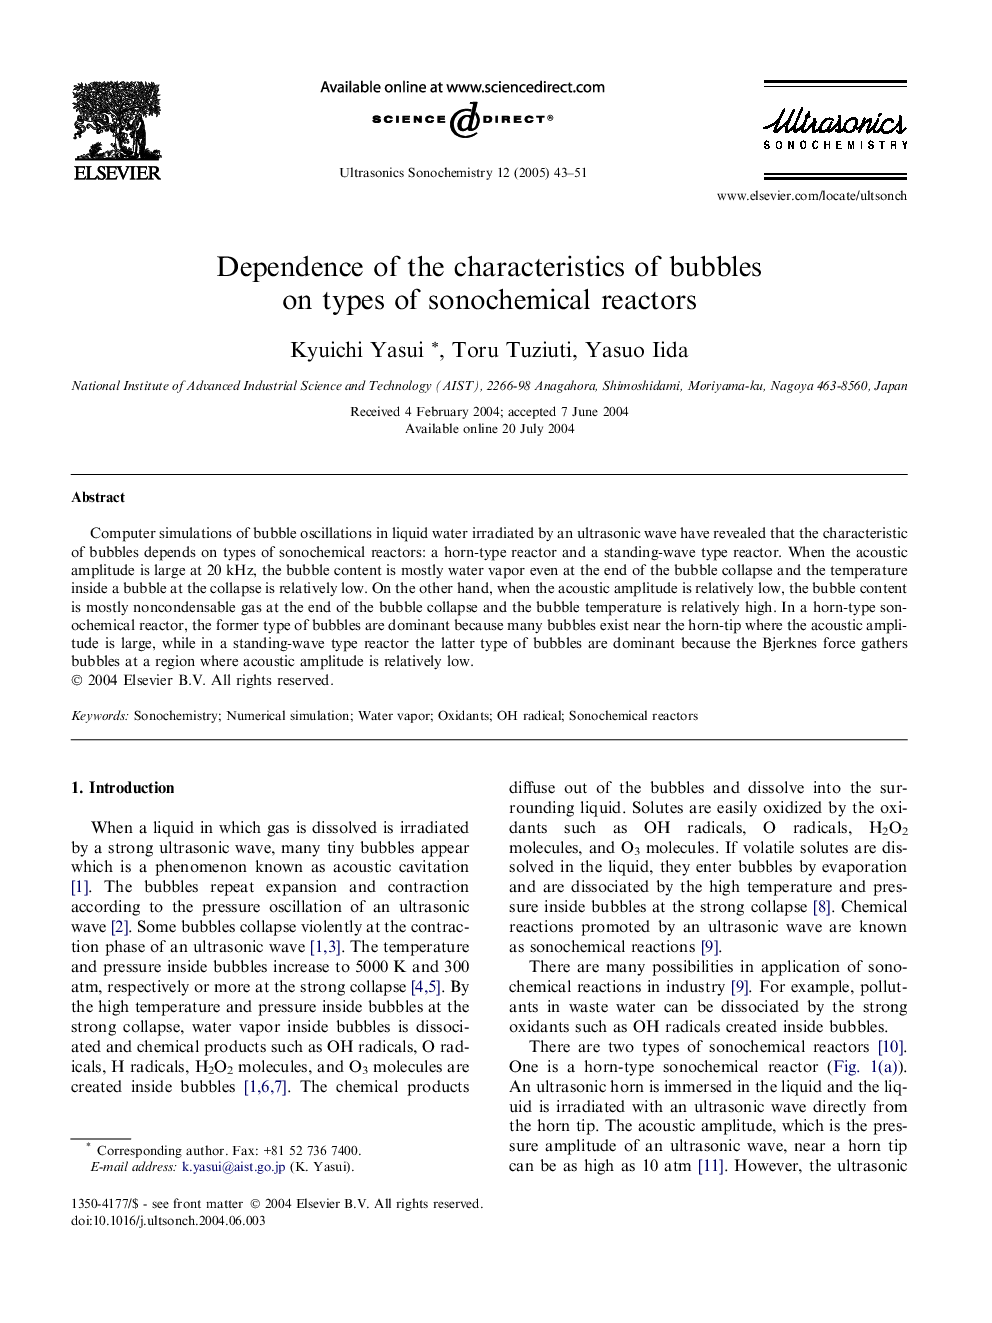 Dependence of the characteristics of bubbles on types of sonochemical reactors